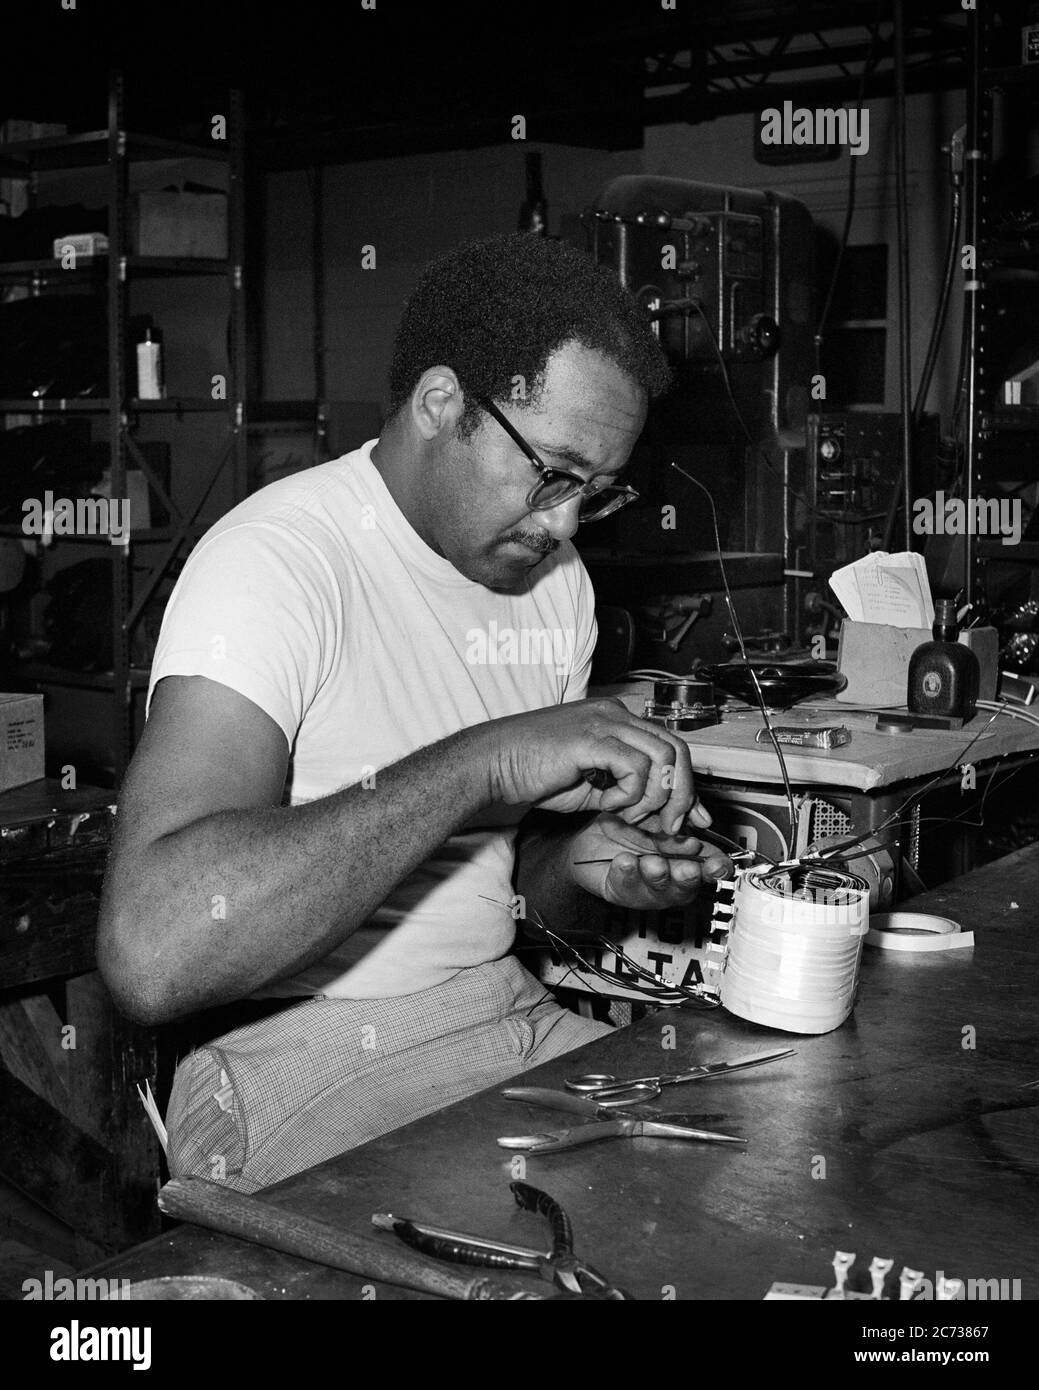 1960s 1970s SKILLED MAN AFRICAN-AMERICAN ELECTRICAL TECHNICIAN REBUILDING REPAIRING AN INDUSTRIAL MACHINE COMPONENT IN SHOP - i5239 HAR001 HARS B&W SUCCESS SKILL OCCUPATION SKILLS STRENGTH CUSTOMER SERVICE AFRICAN-AMERICANS AFRICAN-AMERICAN CAREERS KNOWLEDGE POWERFUL PROGRESS BLACK ETHNICITY INNOVATION PRIDE AN IN OPPORTUNITY MANUFACTURING OCCUPATIONS REPAIRING COMPONENT CONCEPTUAL IMAGINATION STYLISH SKILLED CREATIVITY MID-ADULT MID-ADULT MAN PRECISION BLACK AND WHITE CONCENTRATION HAR001 OLD FASHIONED AFRICAN AMERICANS Stock Photo